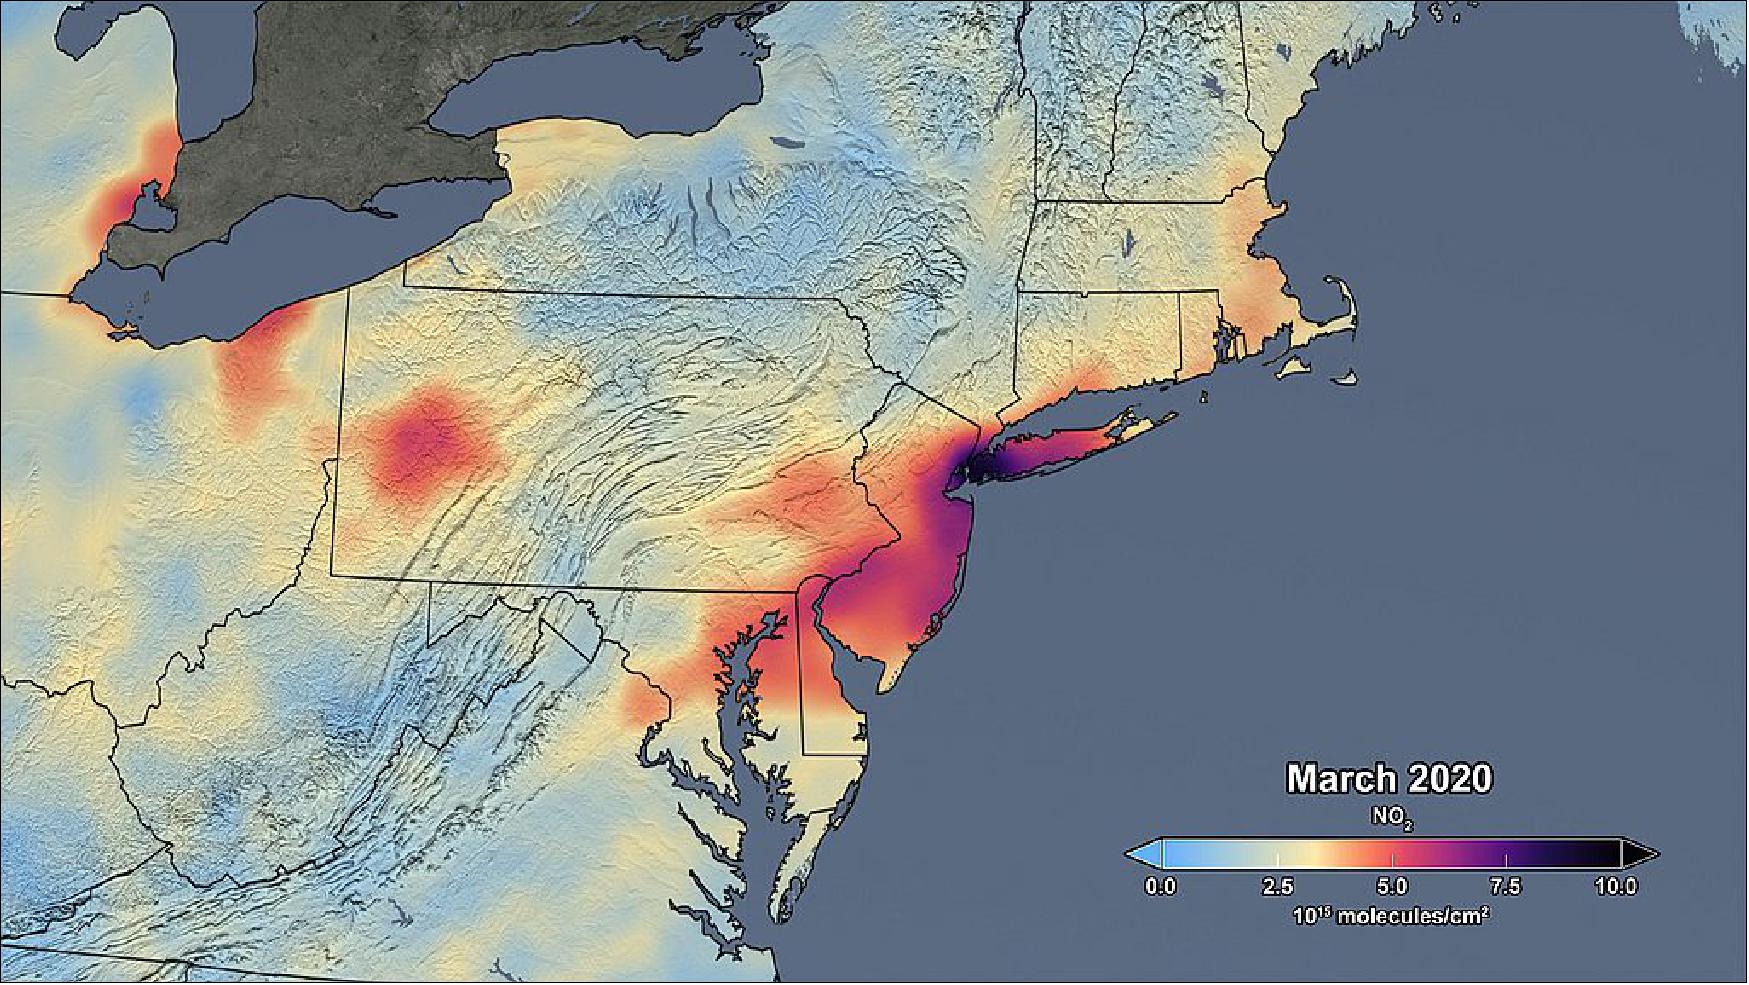 Figure 18: This image shows the average tropospheric NO2 concentration in March 2020 over the Northeast USA as measured with OMI on NASA's Aura satellite (image credit: NASA)